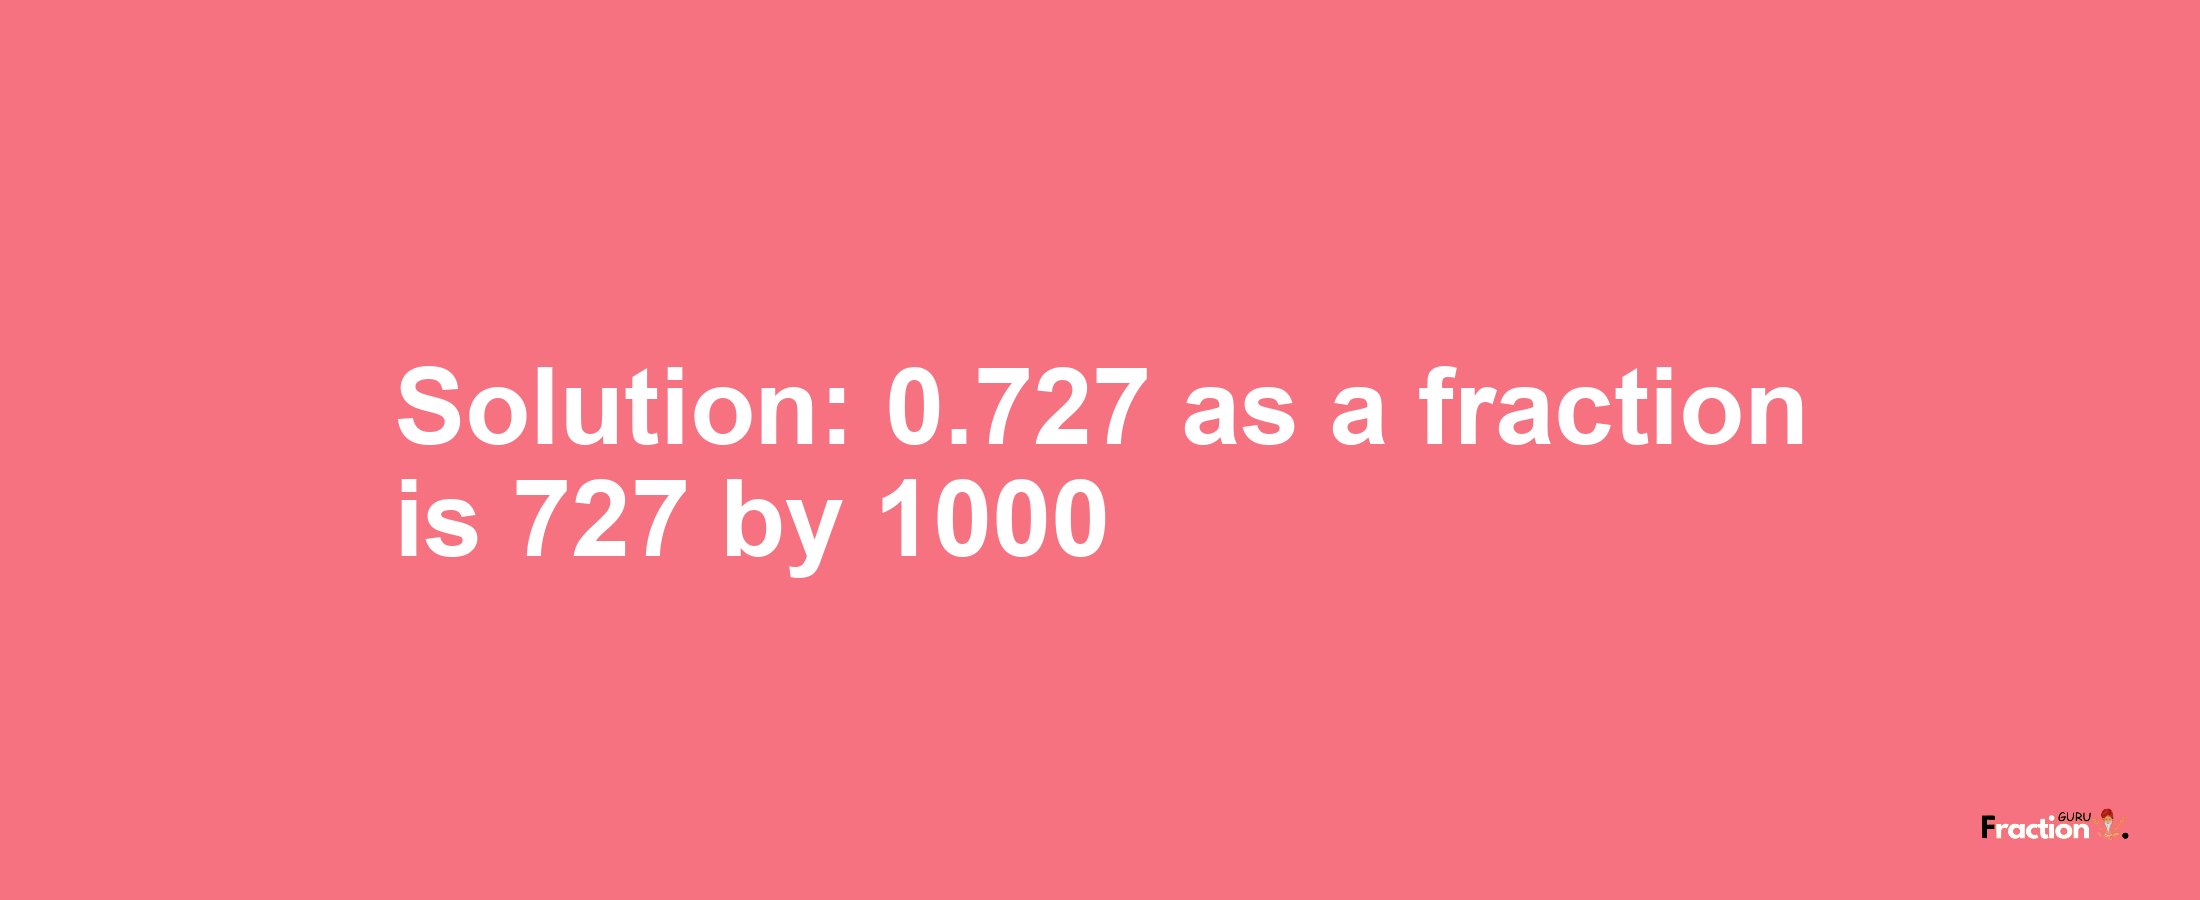 Solution:0.727 as a fraction is 727/1000